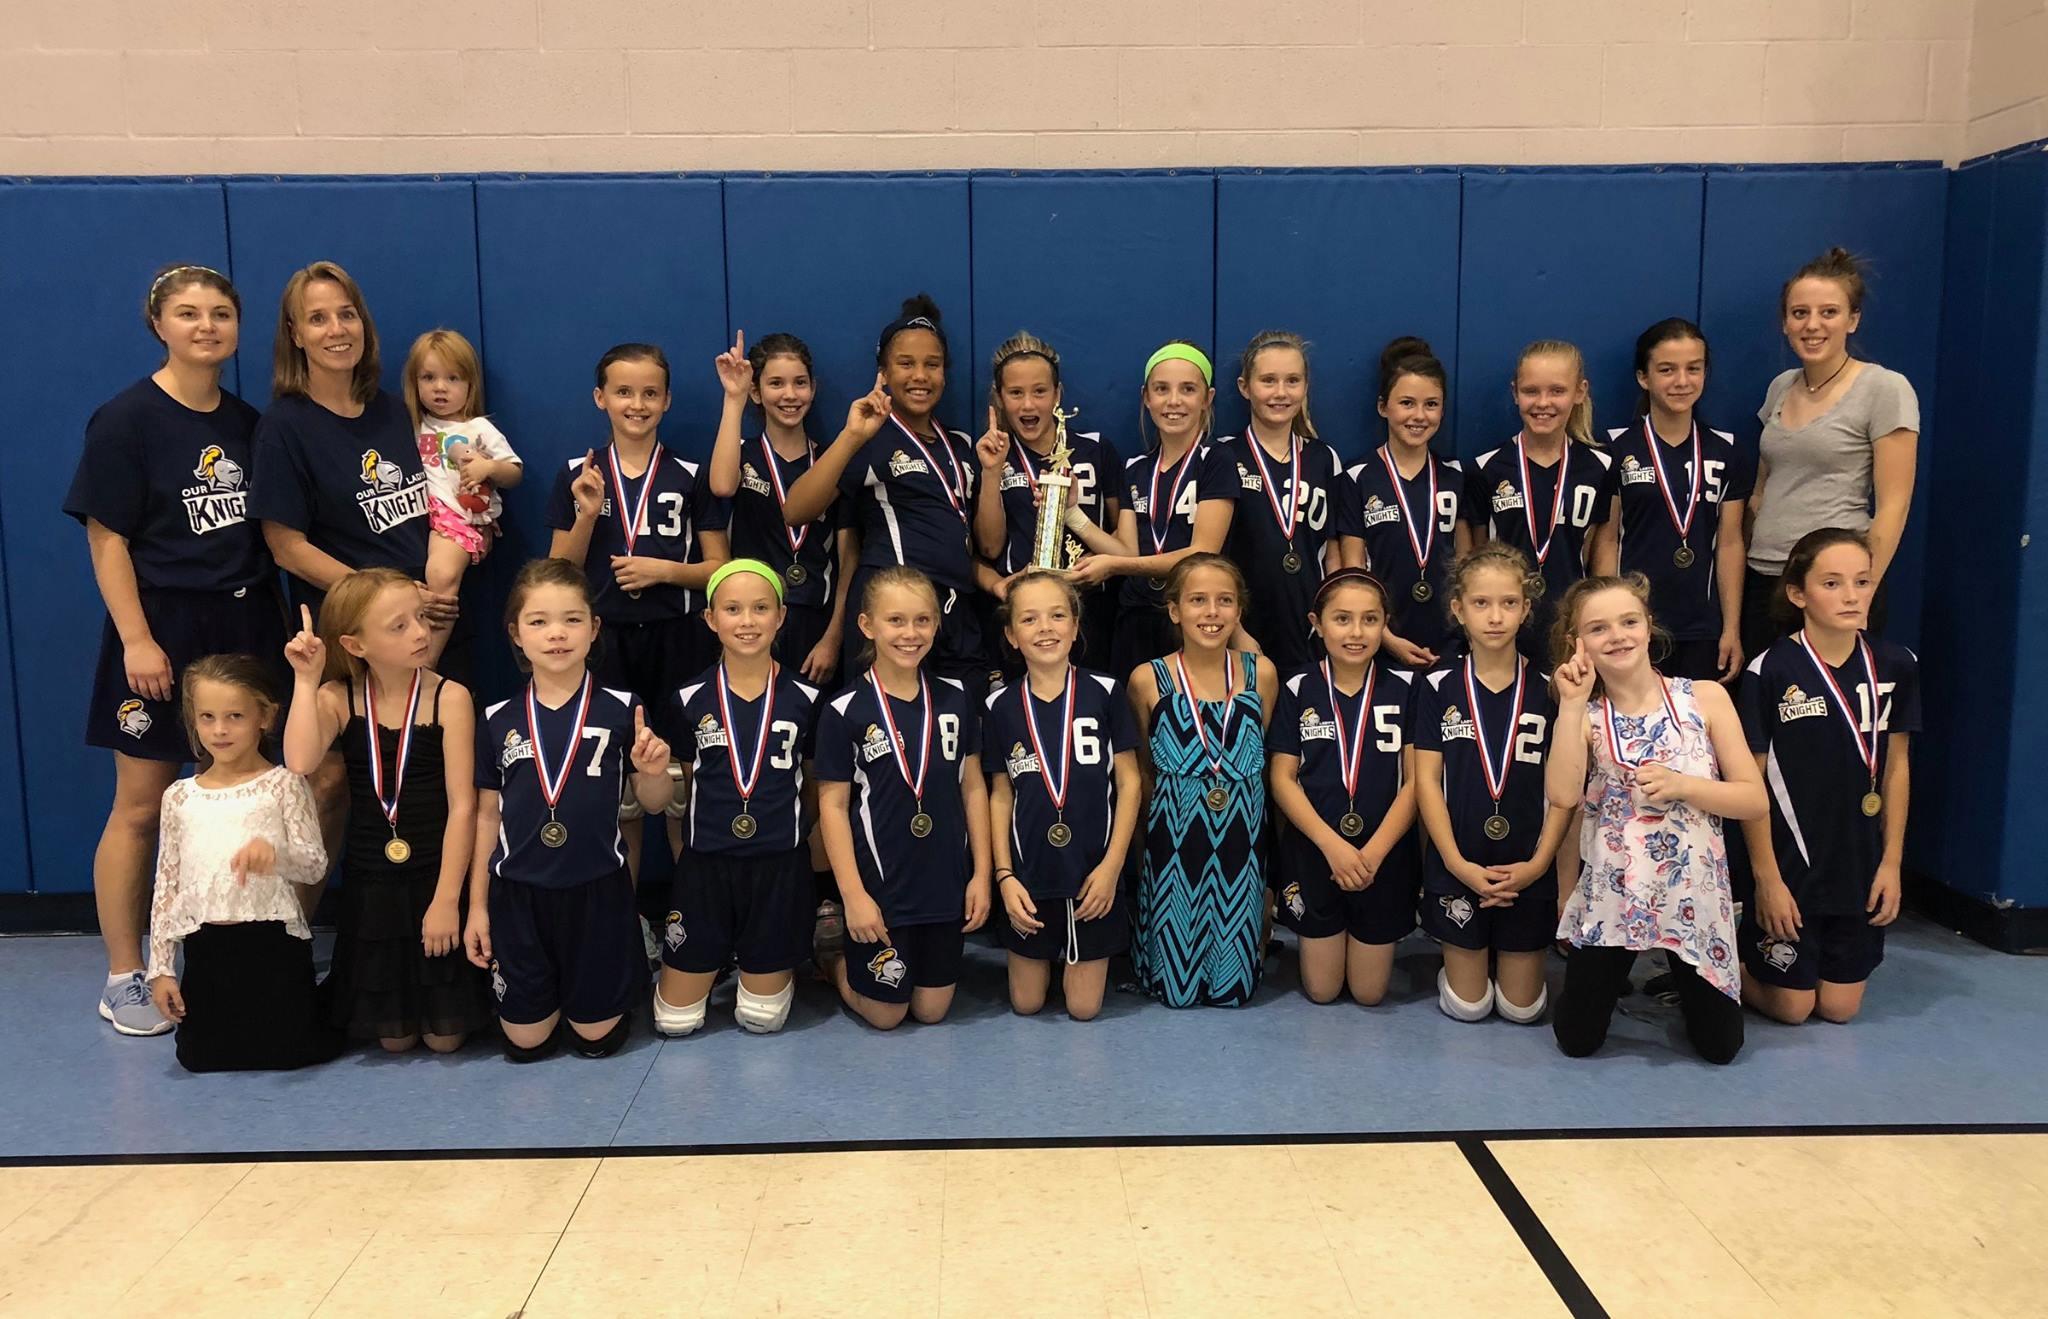 Knights 4/5/6 Volleyball CYO Champs Our Lady School